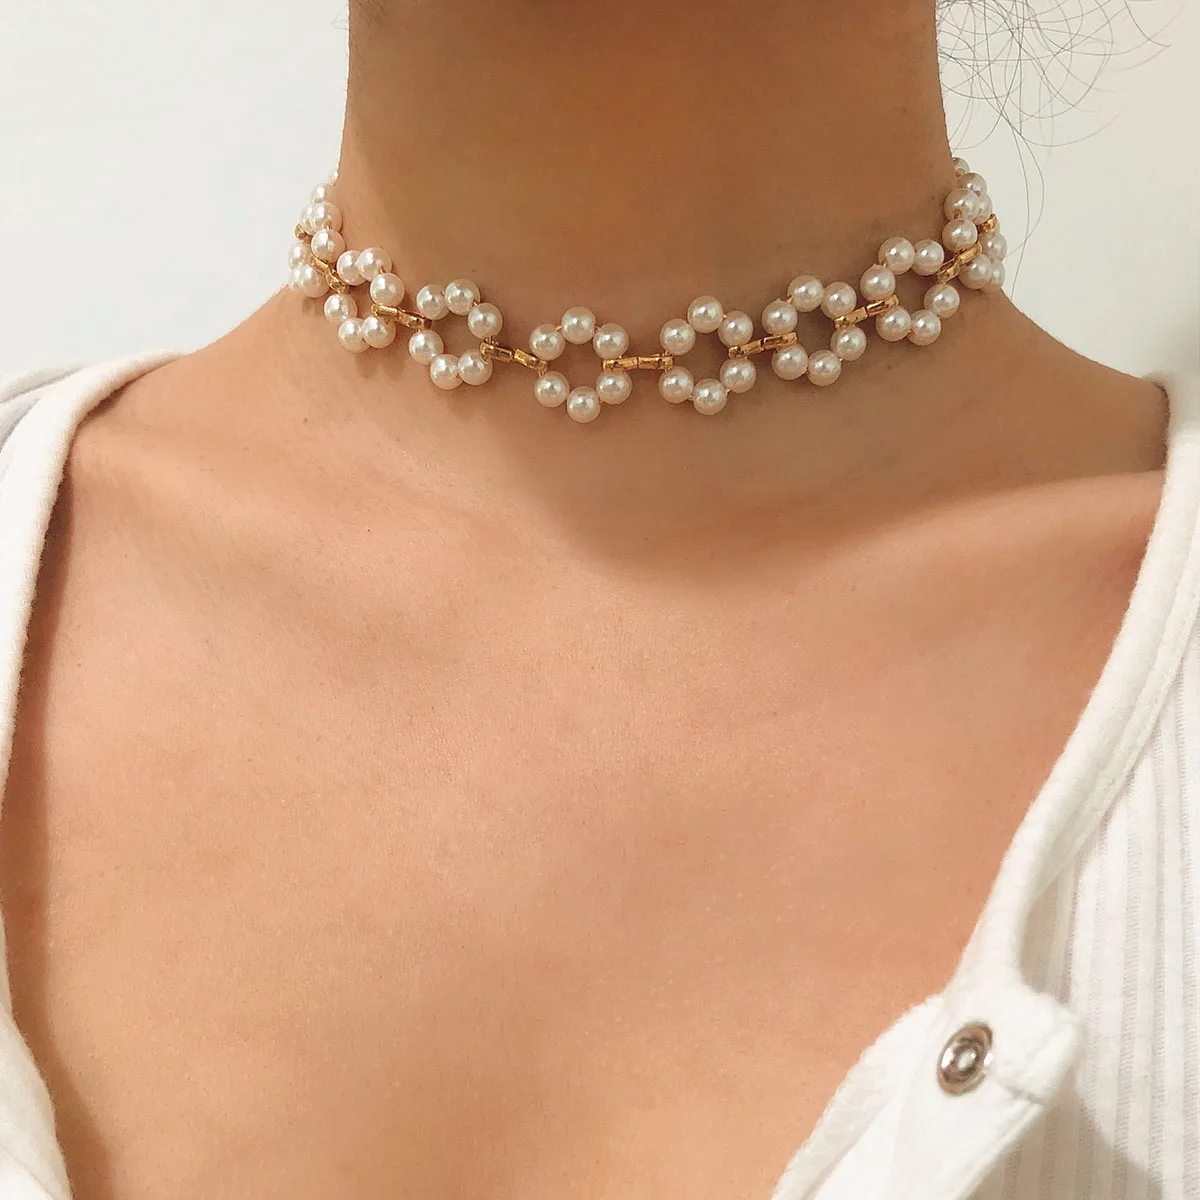 

SHIXIN Bohemia Flower Collar Necklace Simulated Pearl Statement Short Clavicle Chain Choker Necklace for Women Wedding Jewelry, Gold